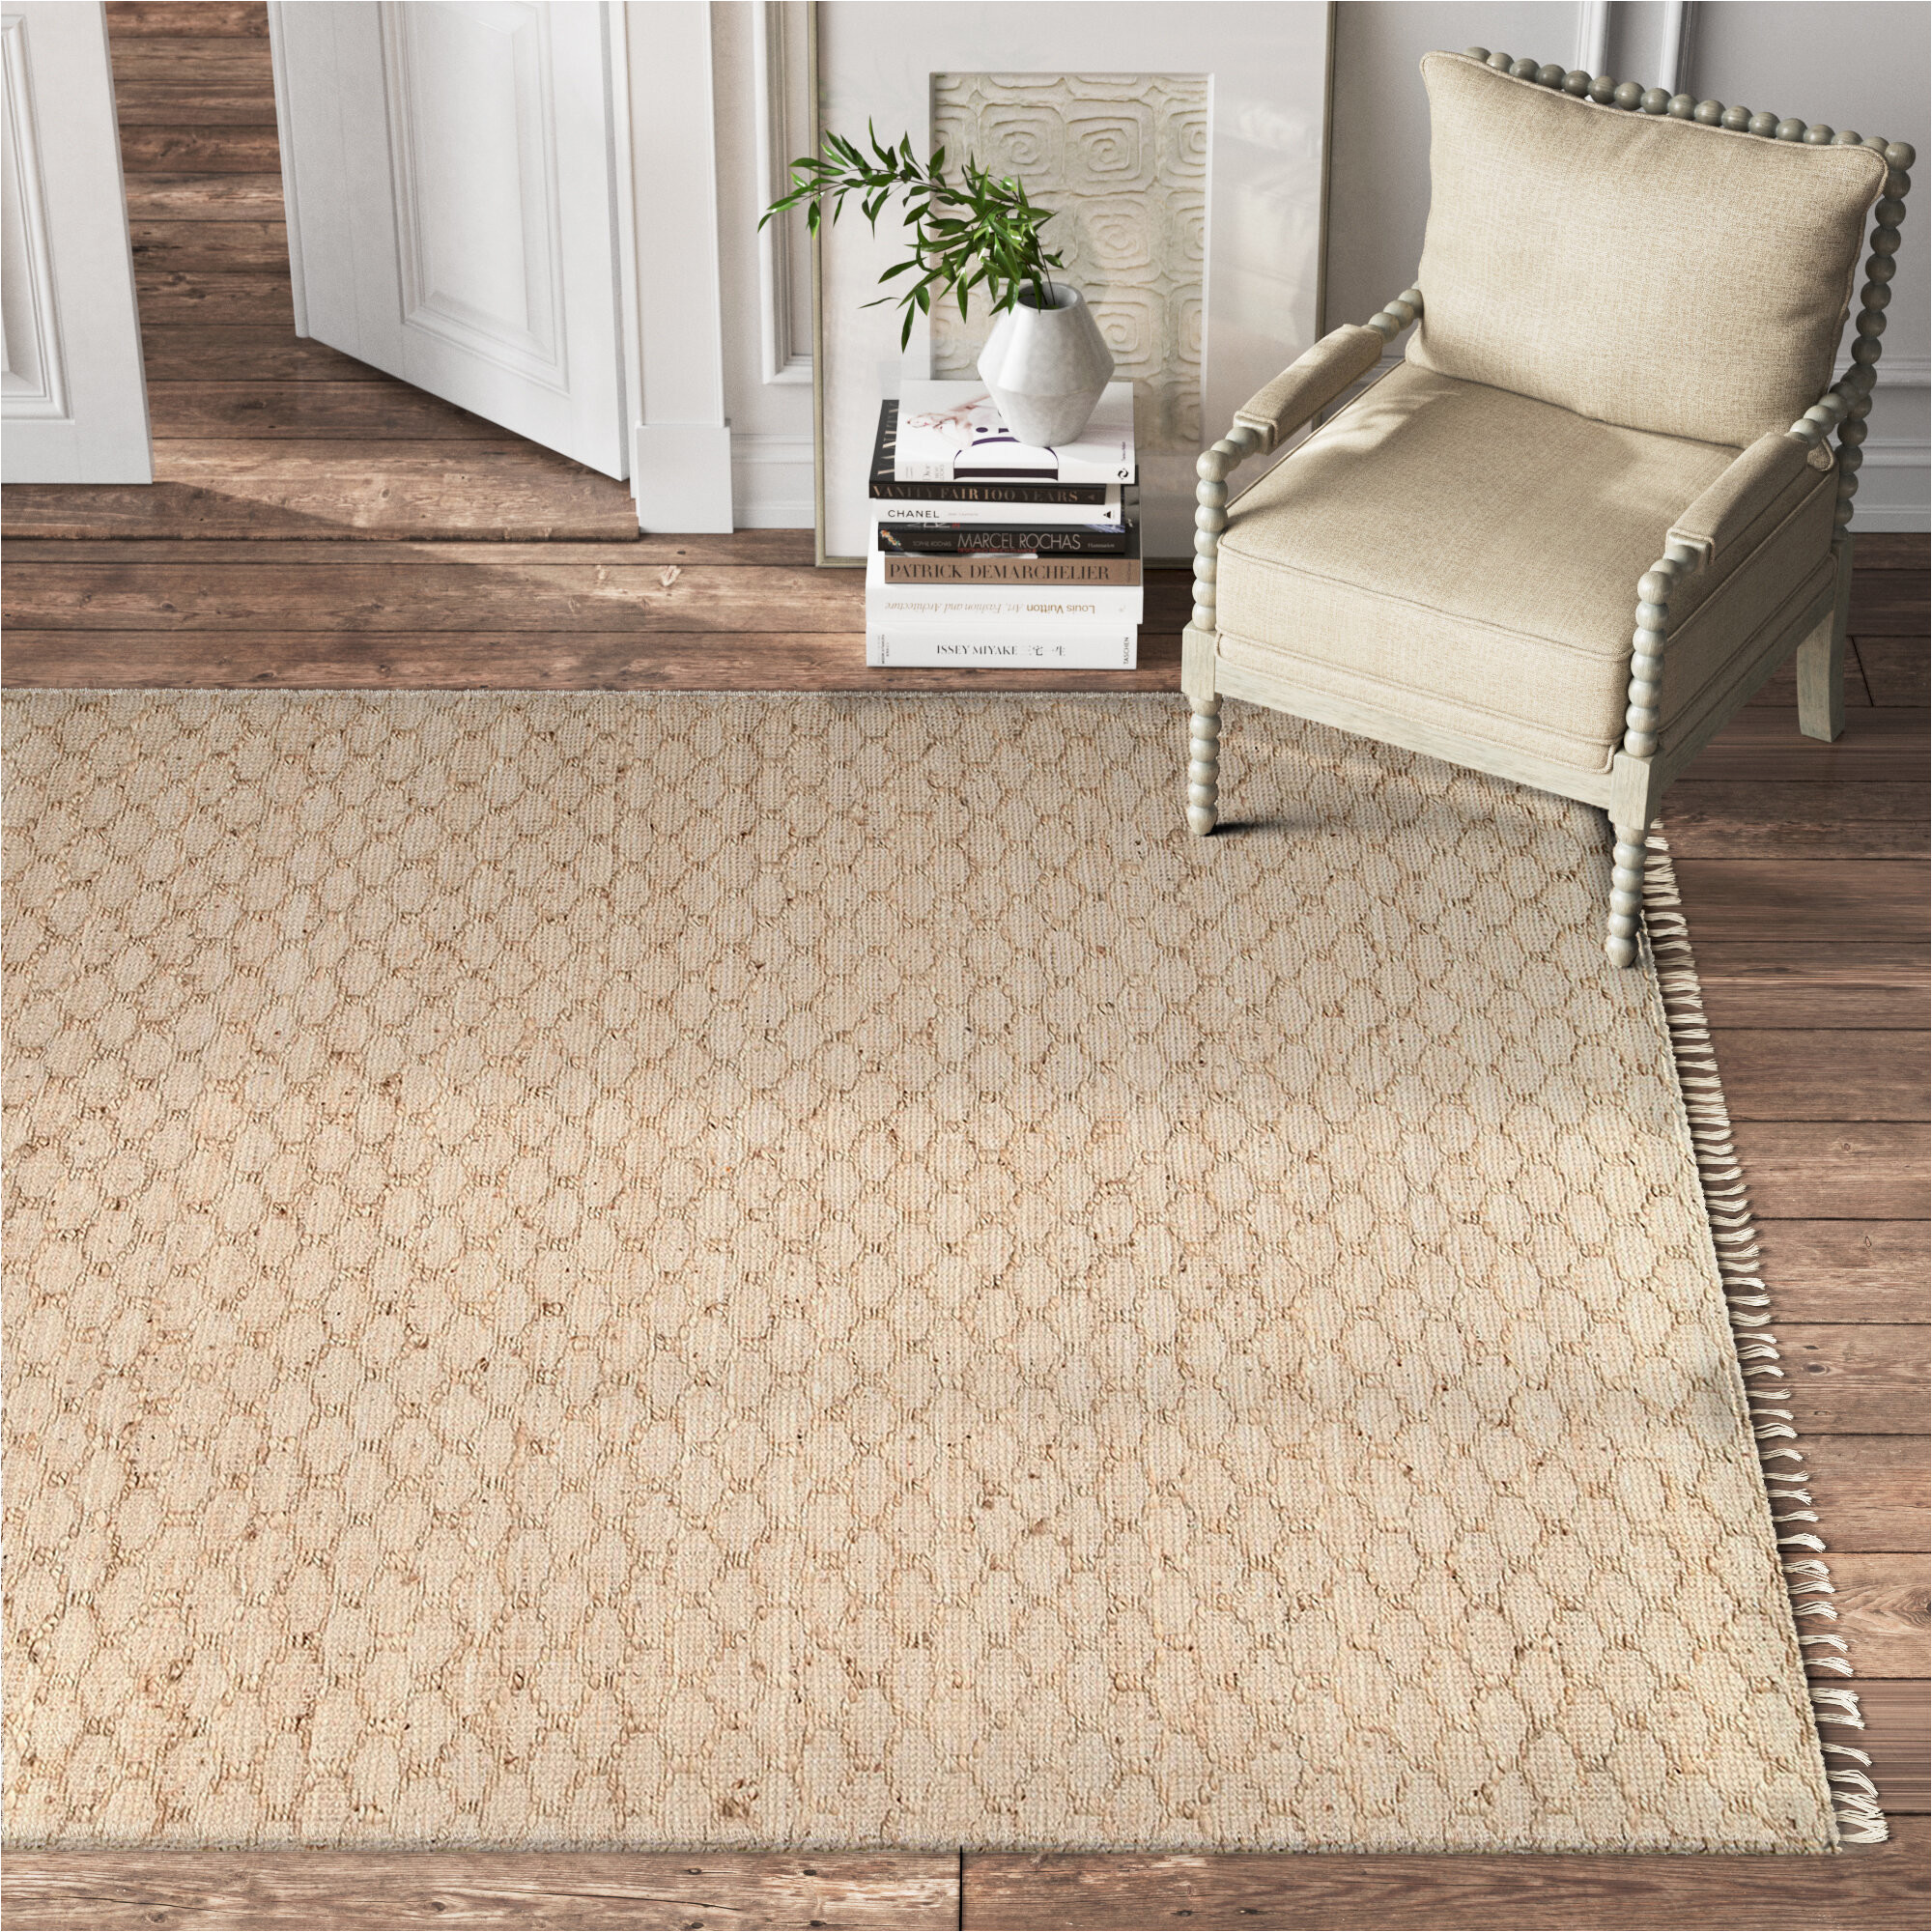 Area Rugs Bel Air Md Hester Hand-tufted Natural area Rug